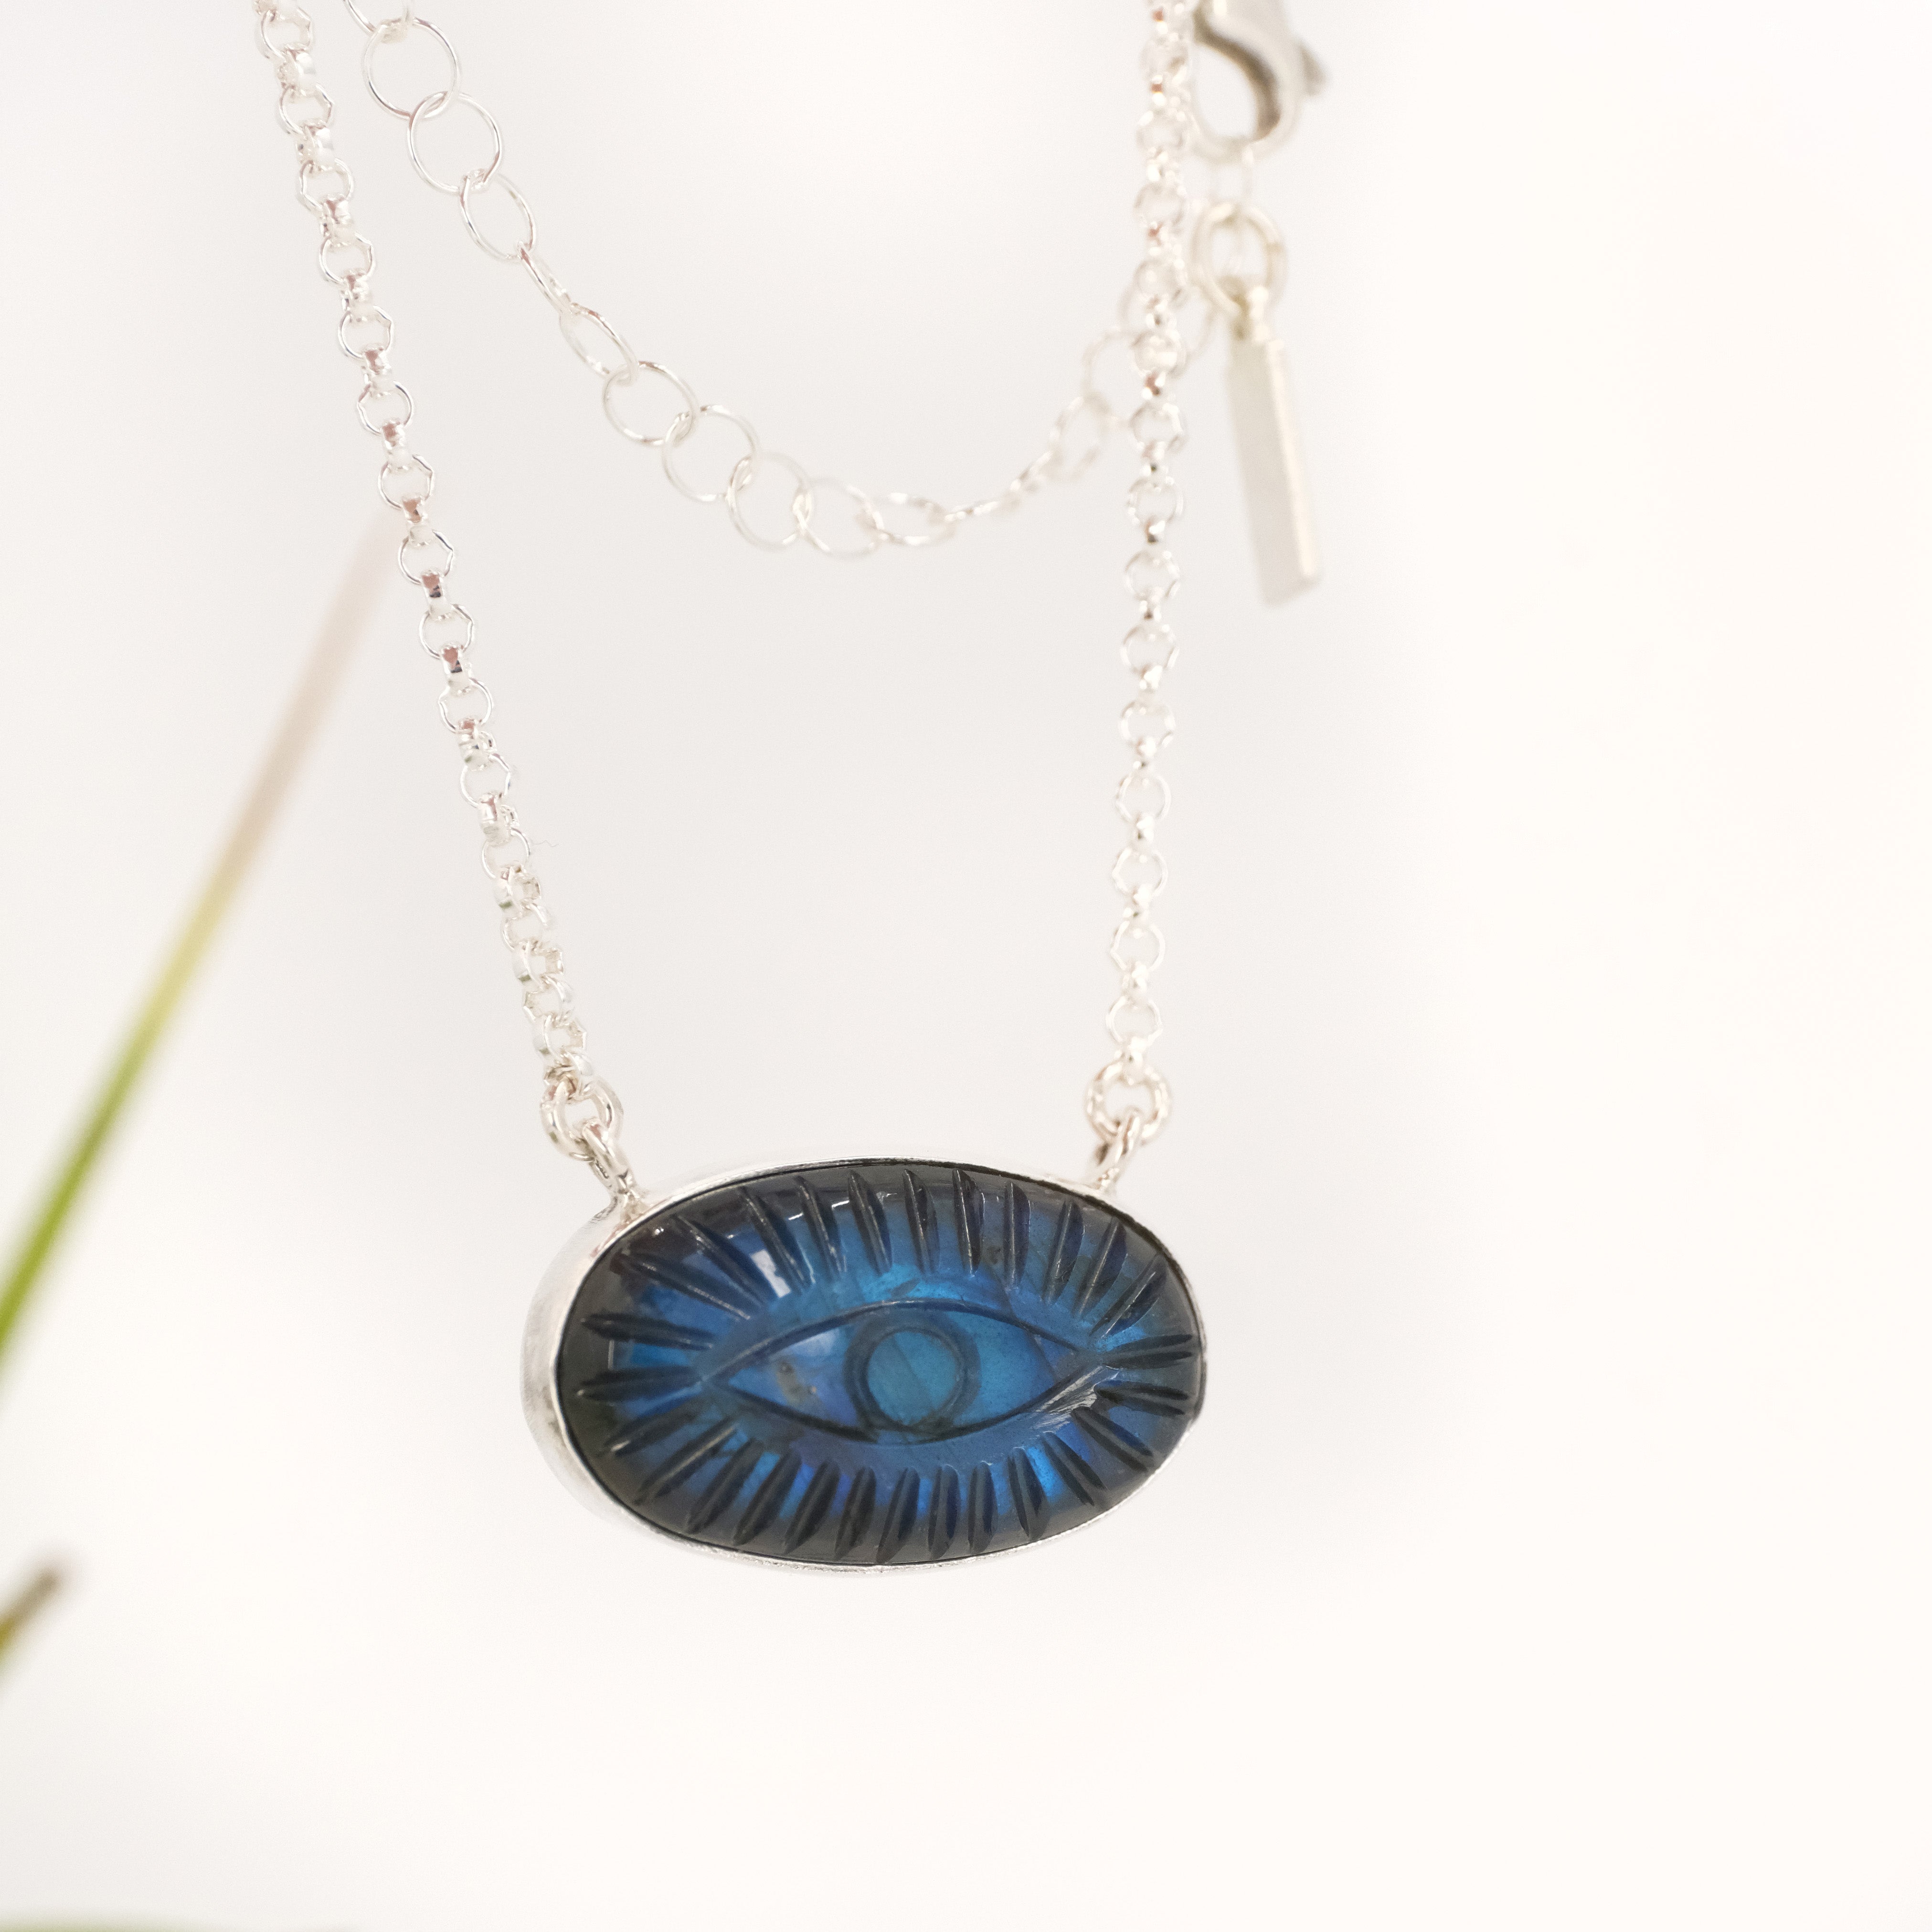 Labradorite Evil Eye Protector Necklace - One of a Kind